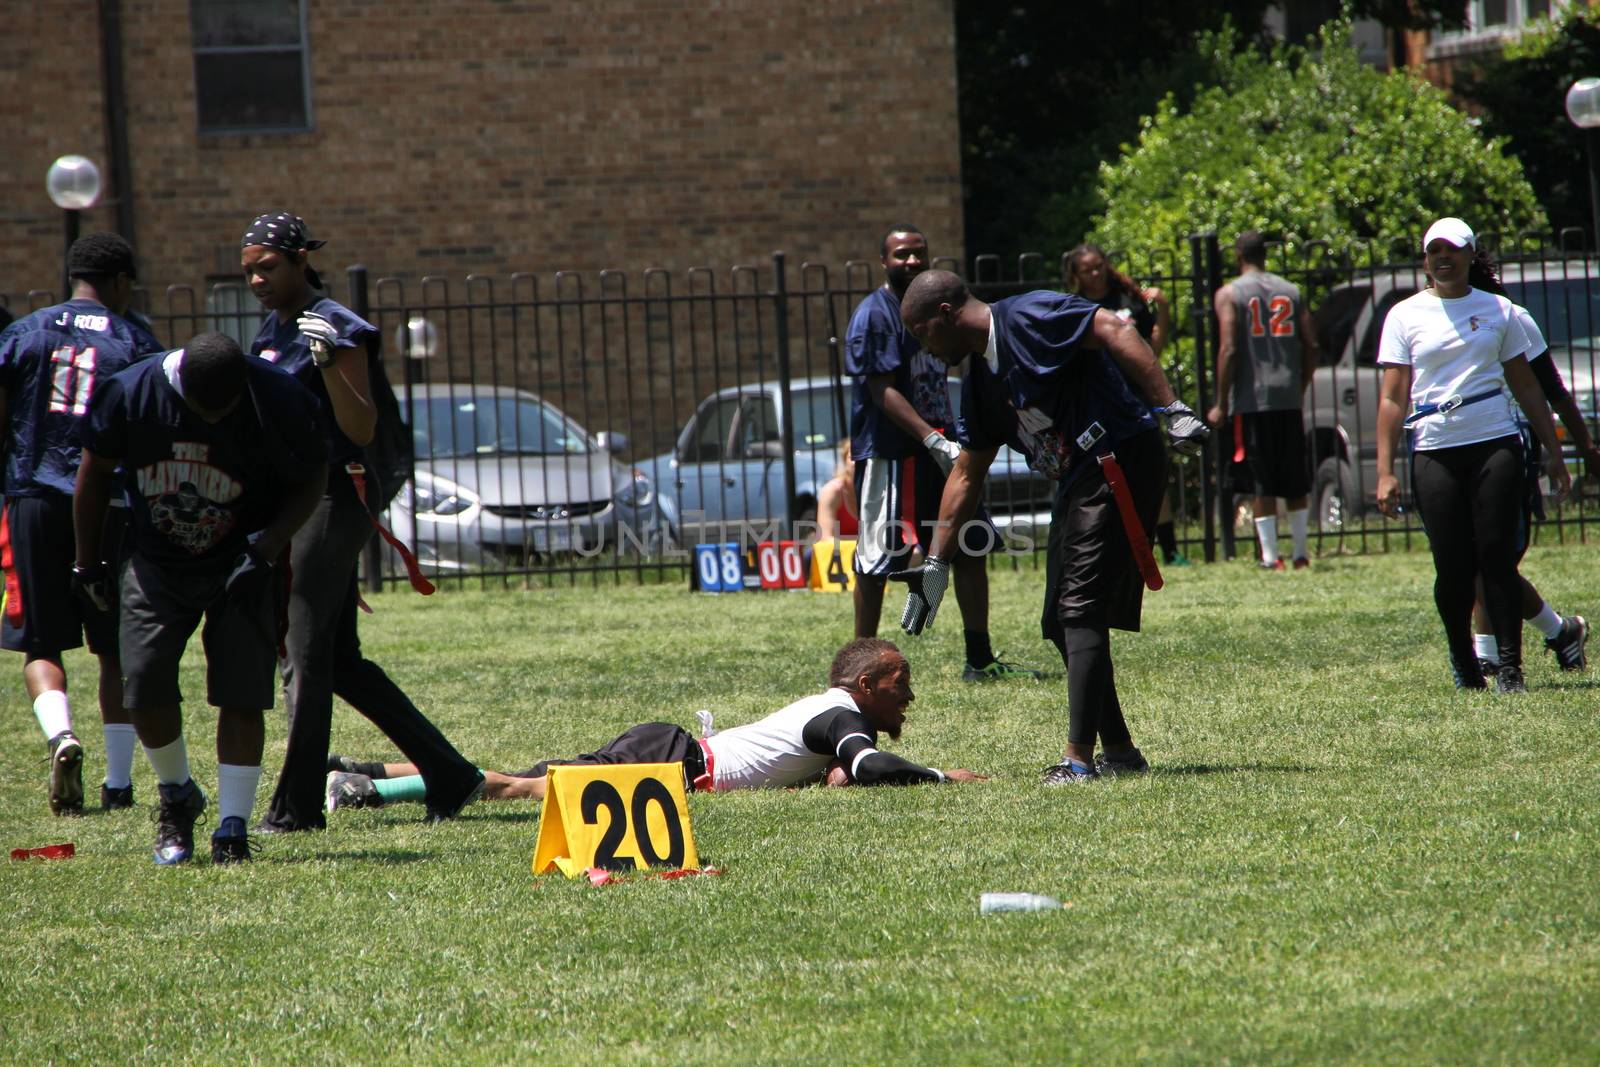 Washington DC, USA - may 19, 2012. African Americans play a game near the College. Honest sport one athlete fell, and the other helps him to rise